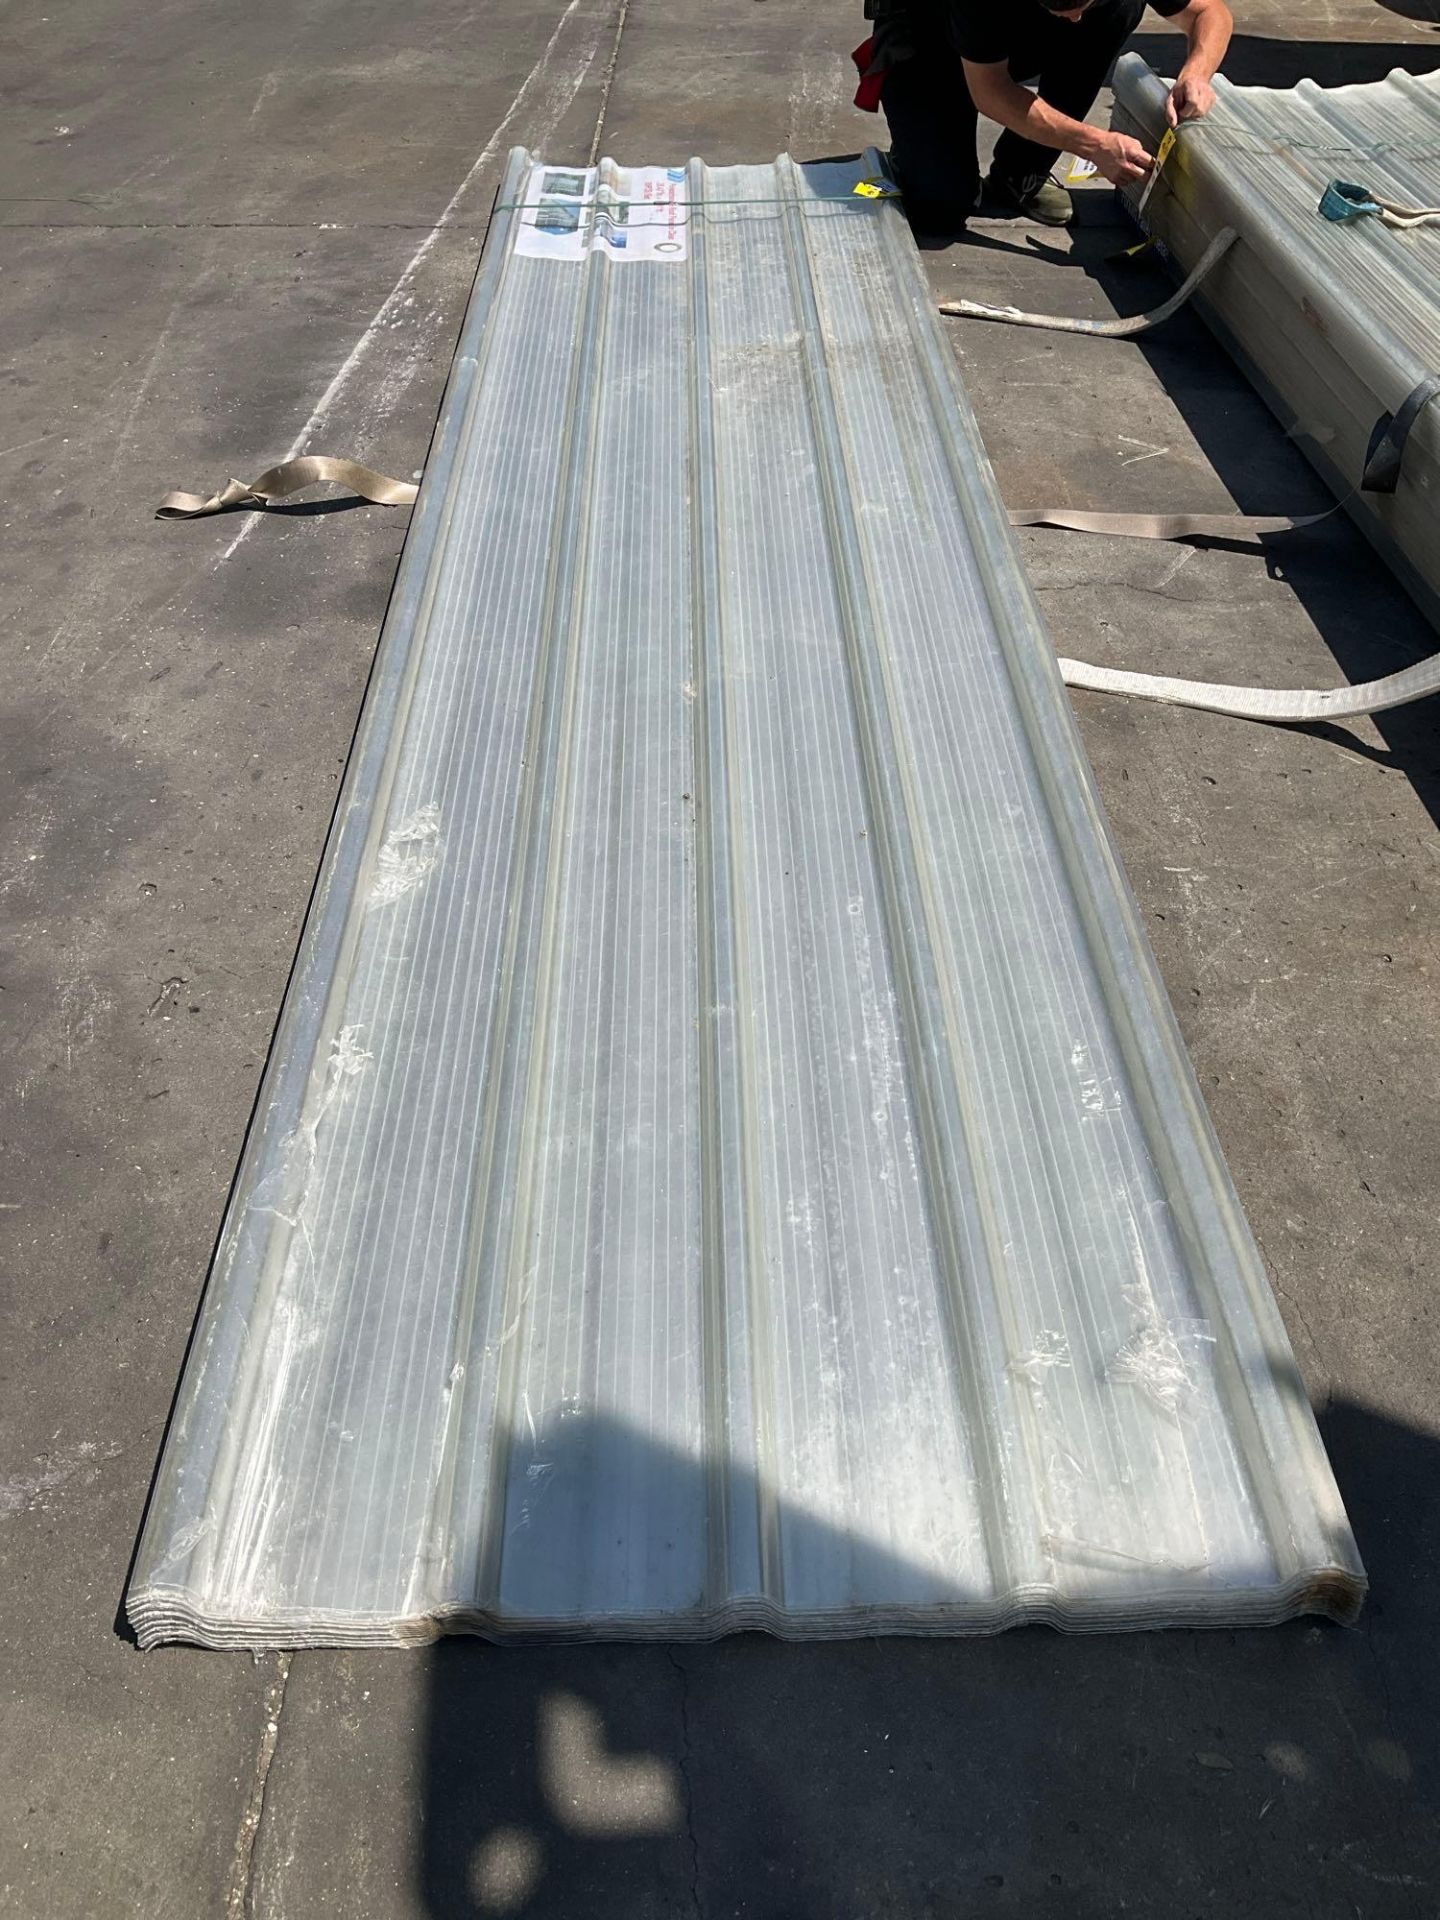 UNUSED POLYCARBONATE ROOF PANELS CLEAR, APPROX 35.43IN x 11.81FT, APPROX 30 PIECES - Image 3 of 7